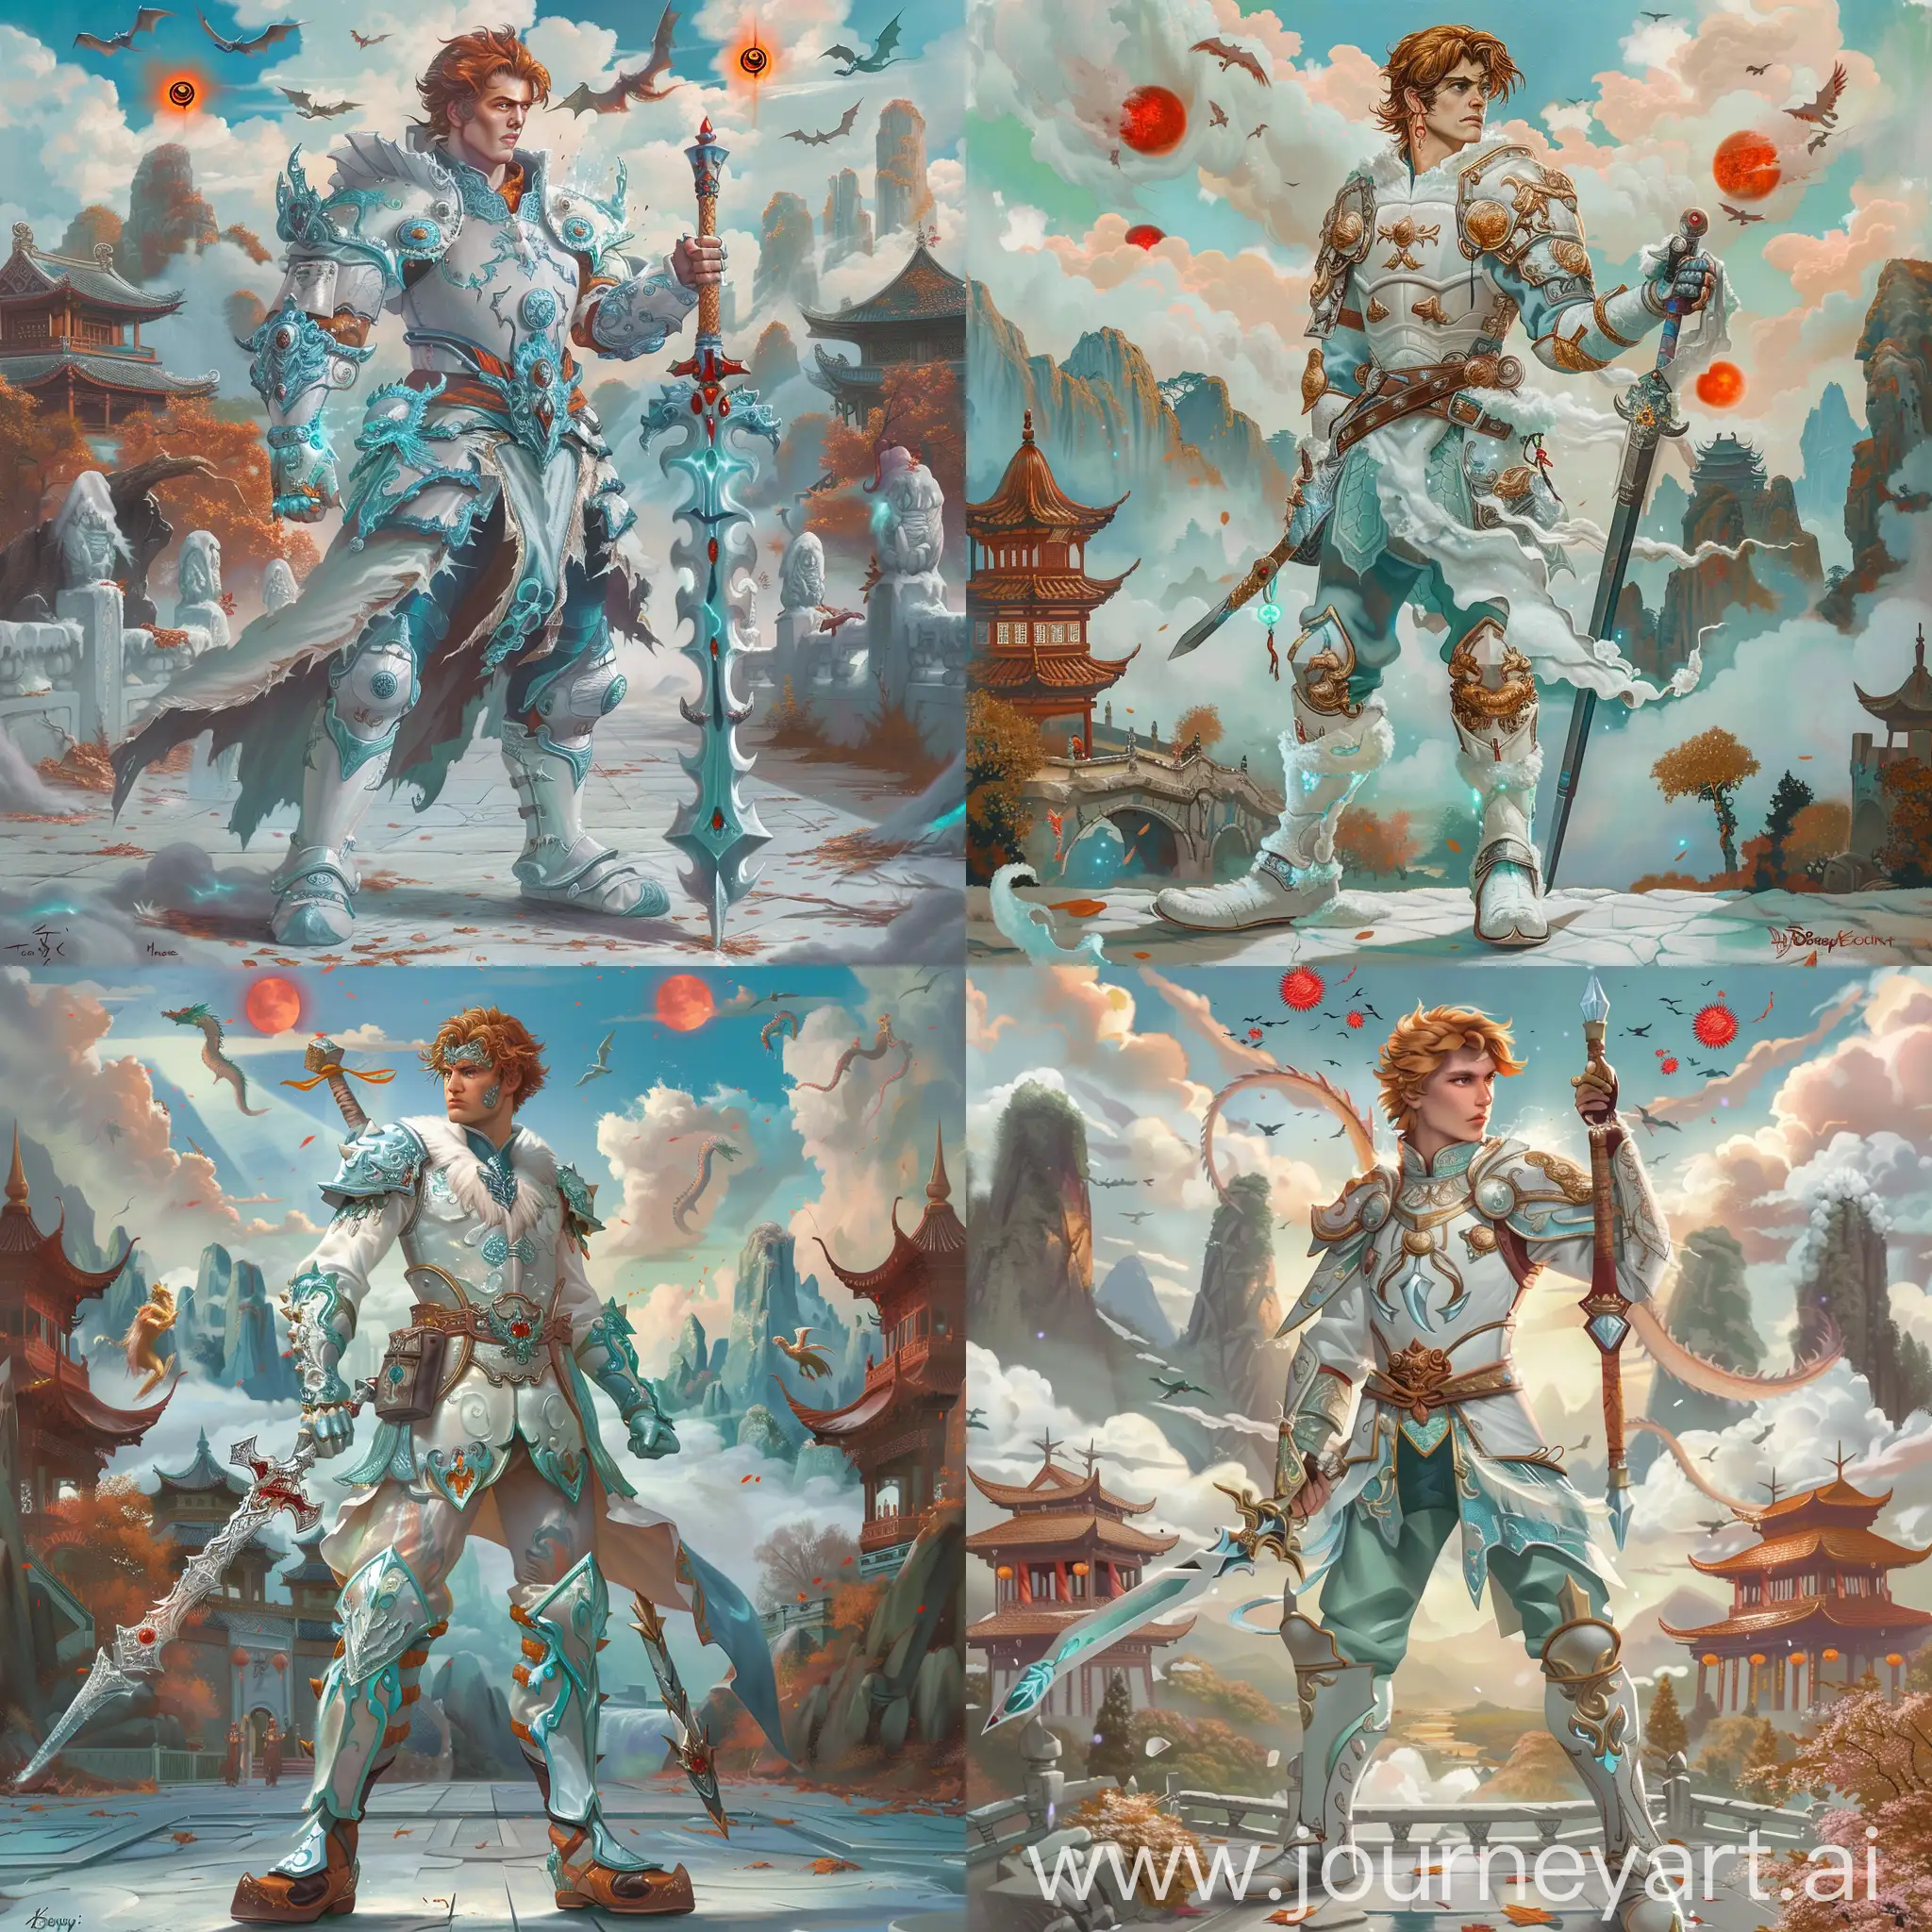 Historic painting style:

a Disney Villain, Prince Hans, he has brown orange hair, white and light blue color Chinese medieval armor and boots, he holds a medieval Chinese style sword in right hand, 

Chinese Guilin mountains and temple as background, evil iced dragons and three small red blood suns in cloudy sky.